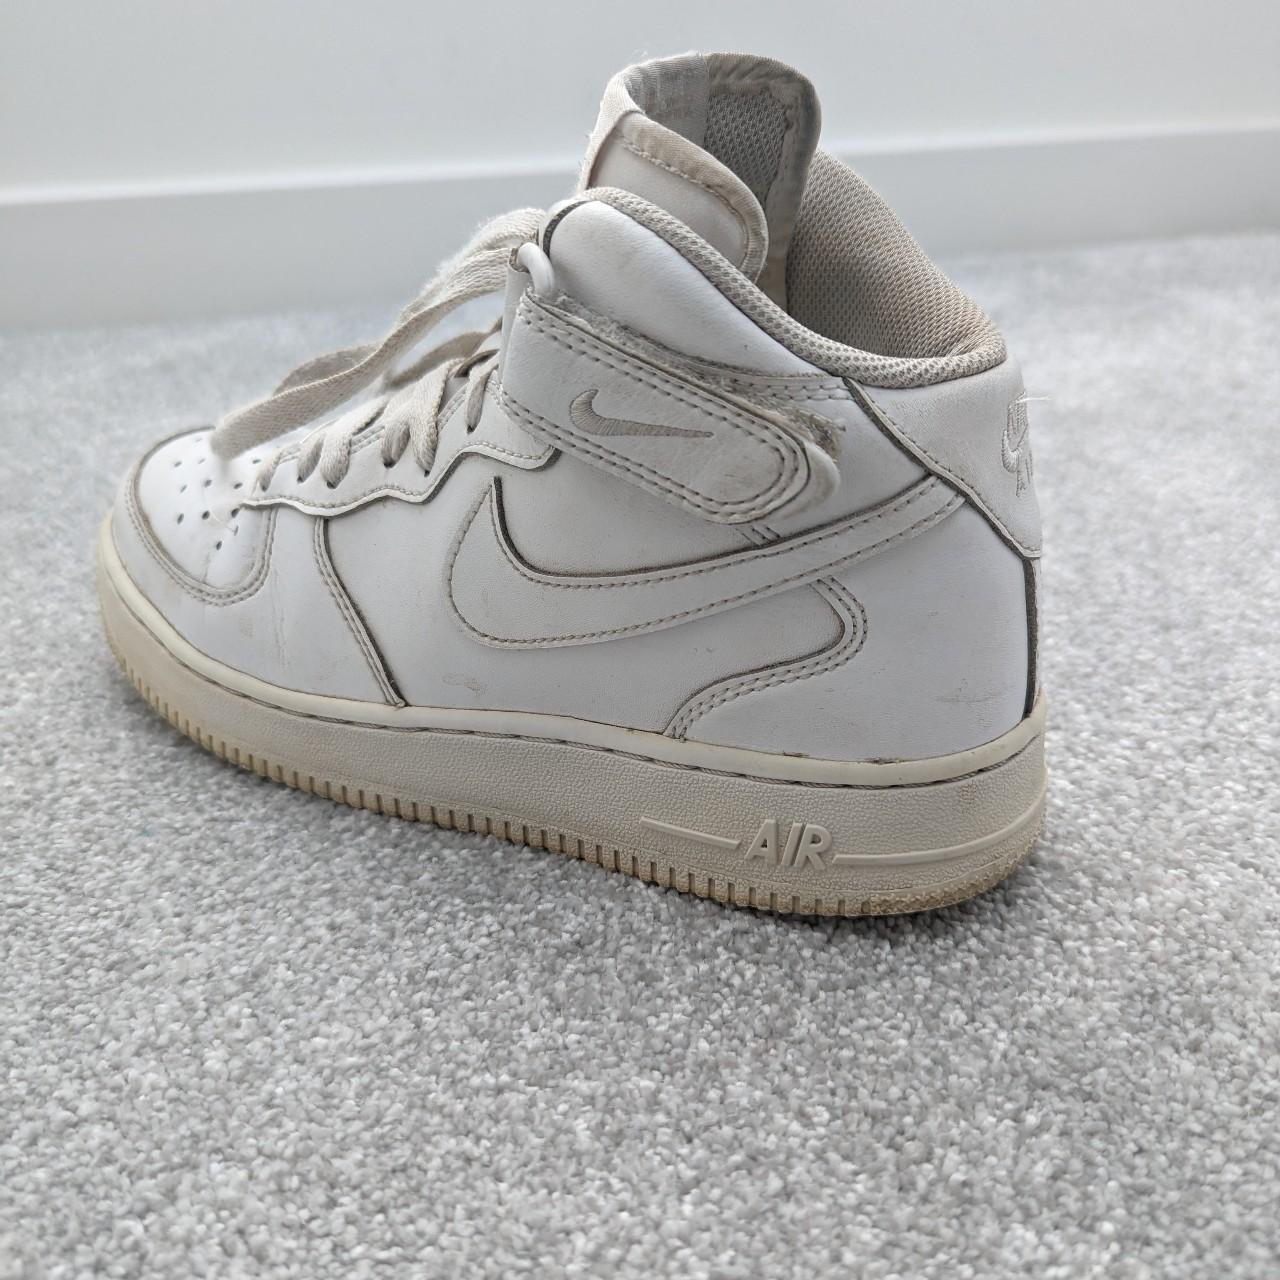 Nike Air Force 1 Mid Leather Trainers 314195-113... - Depop